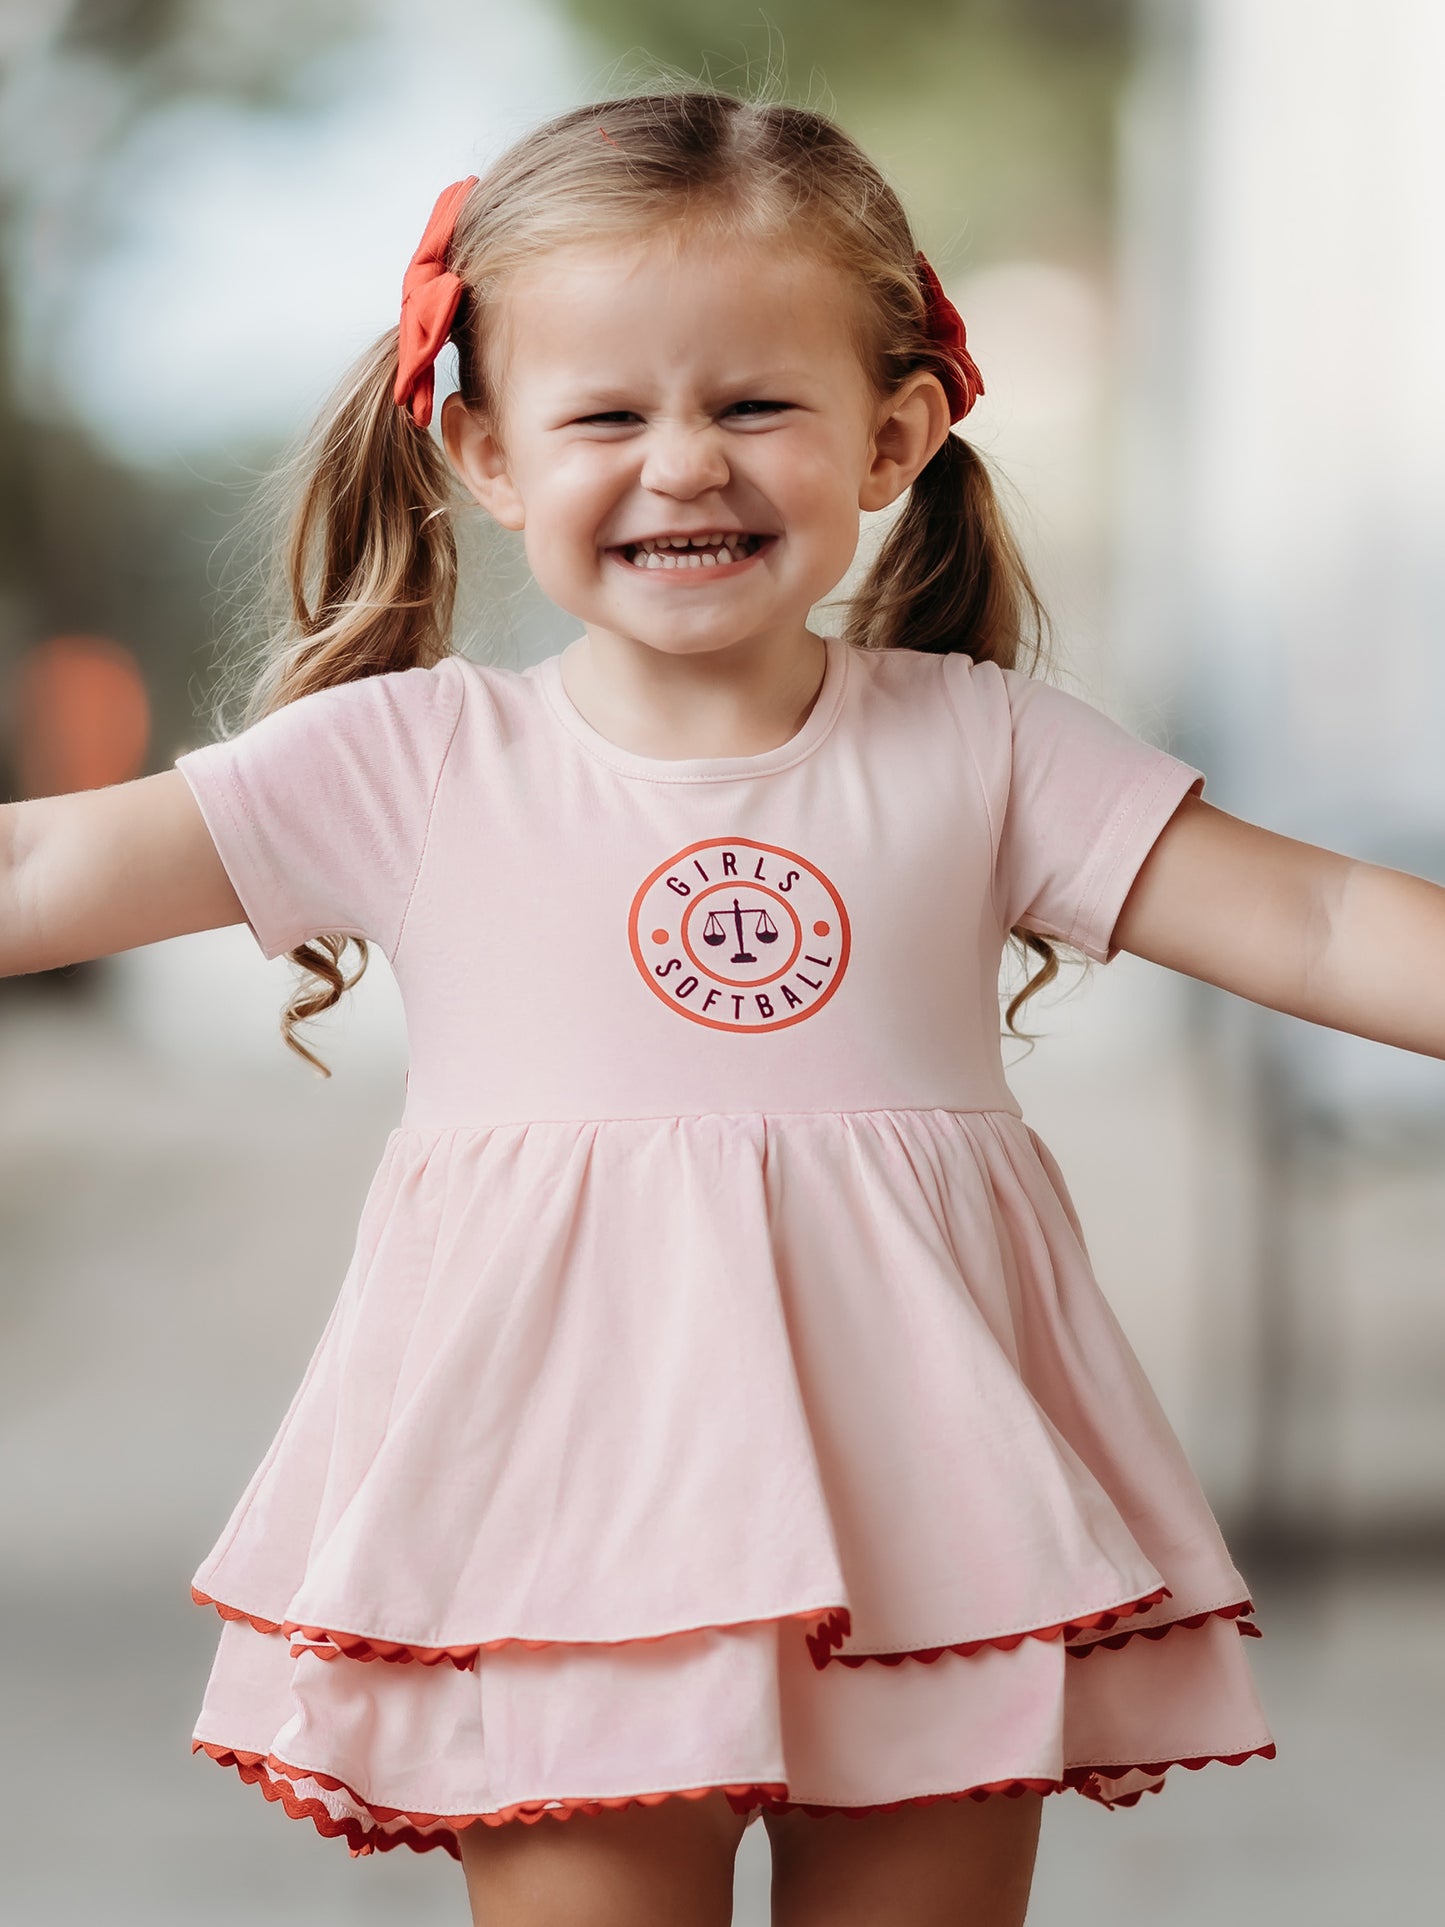 This image of a girl features the product Belle Bubble - Girls Softball. This pink double skirted dress has the same Girls Softball logo on the front as our Girl’s Softball Dress & Hat.